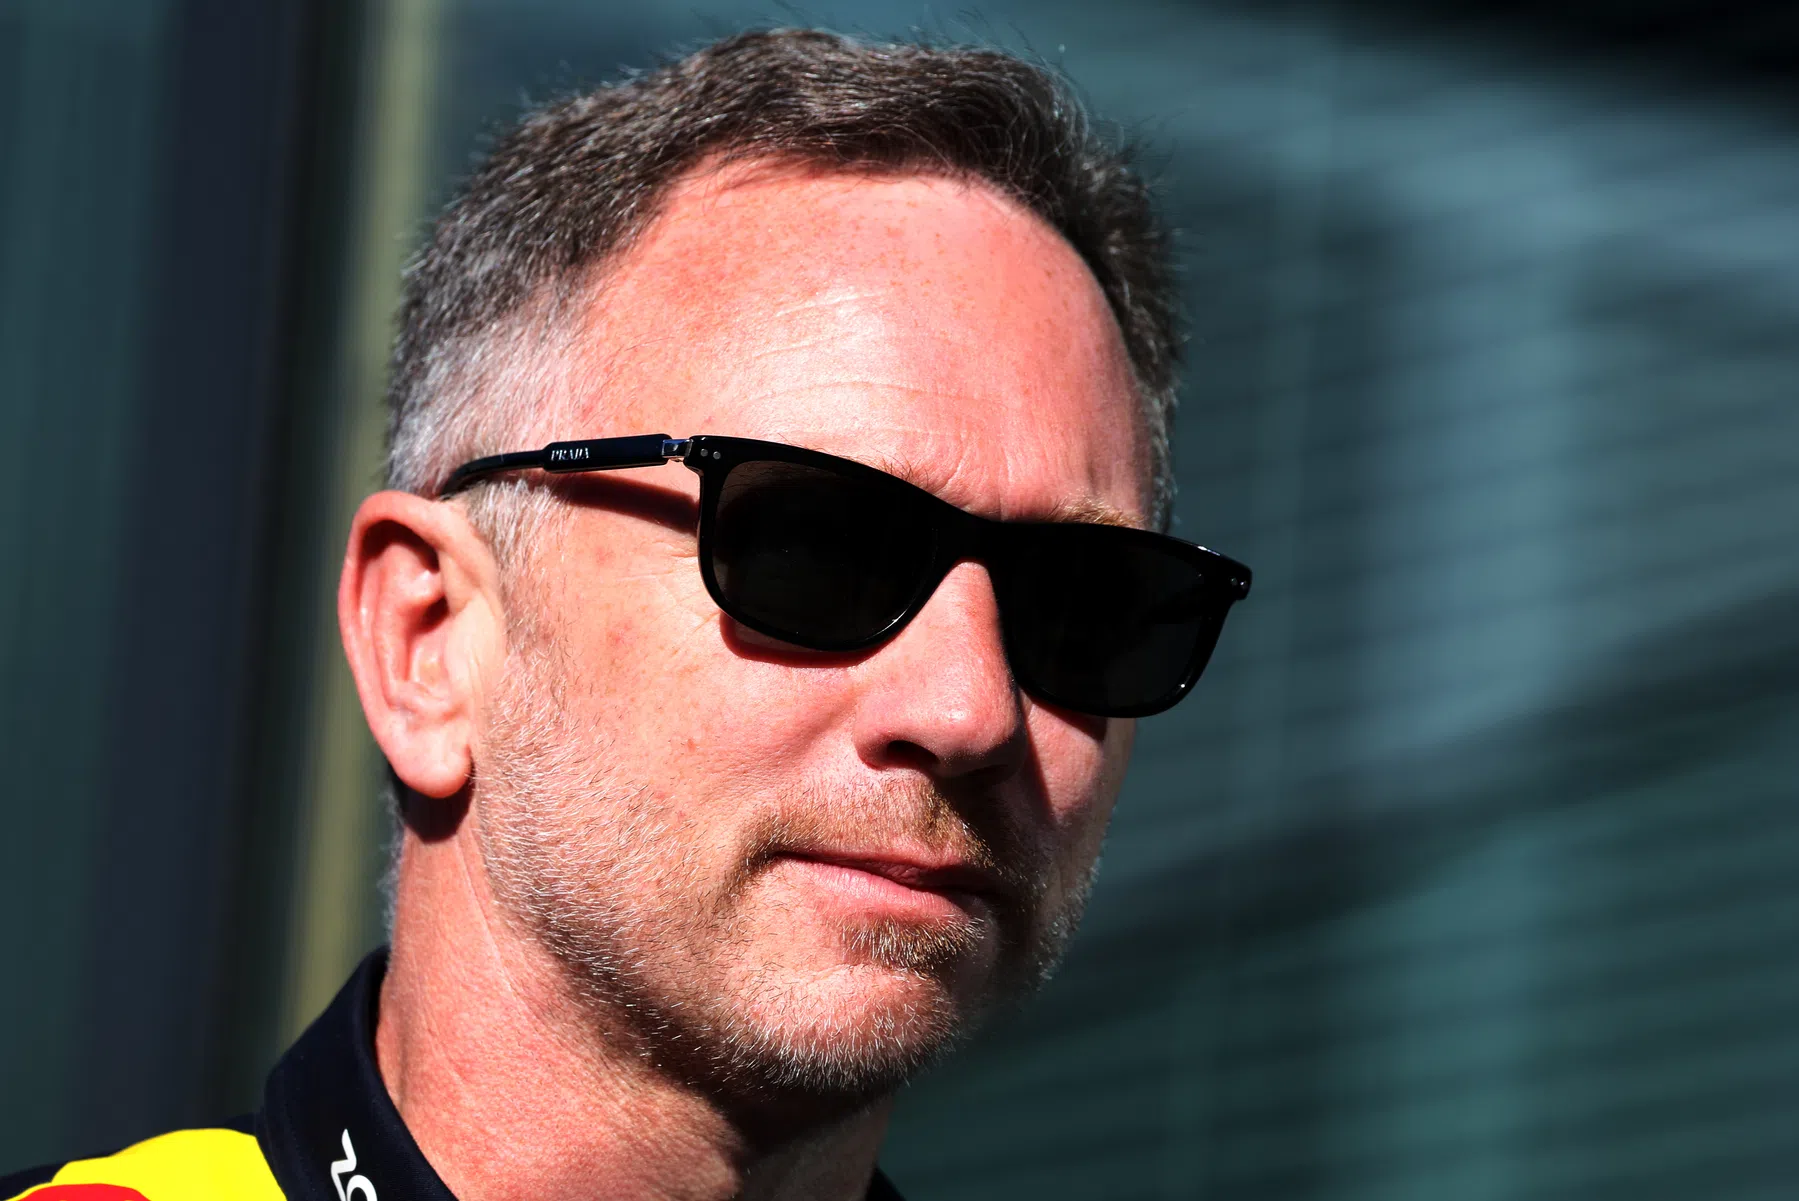 horner sees Verstappen excel and prove why he is F1 champion